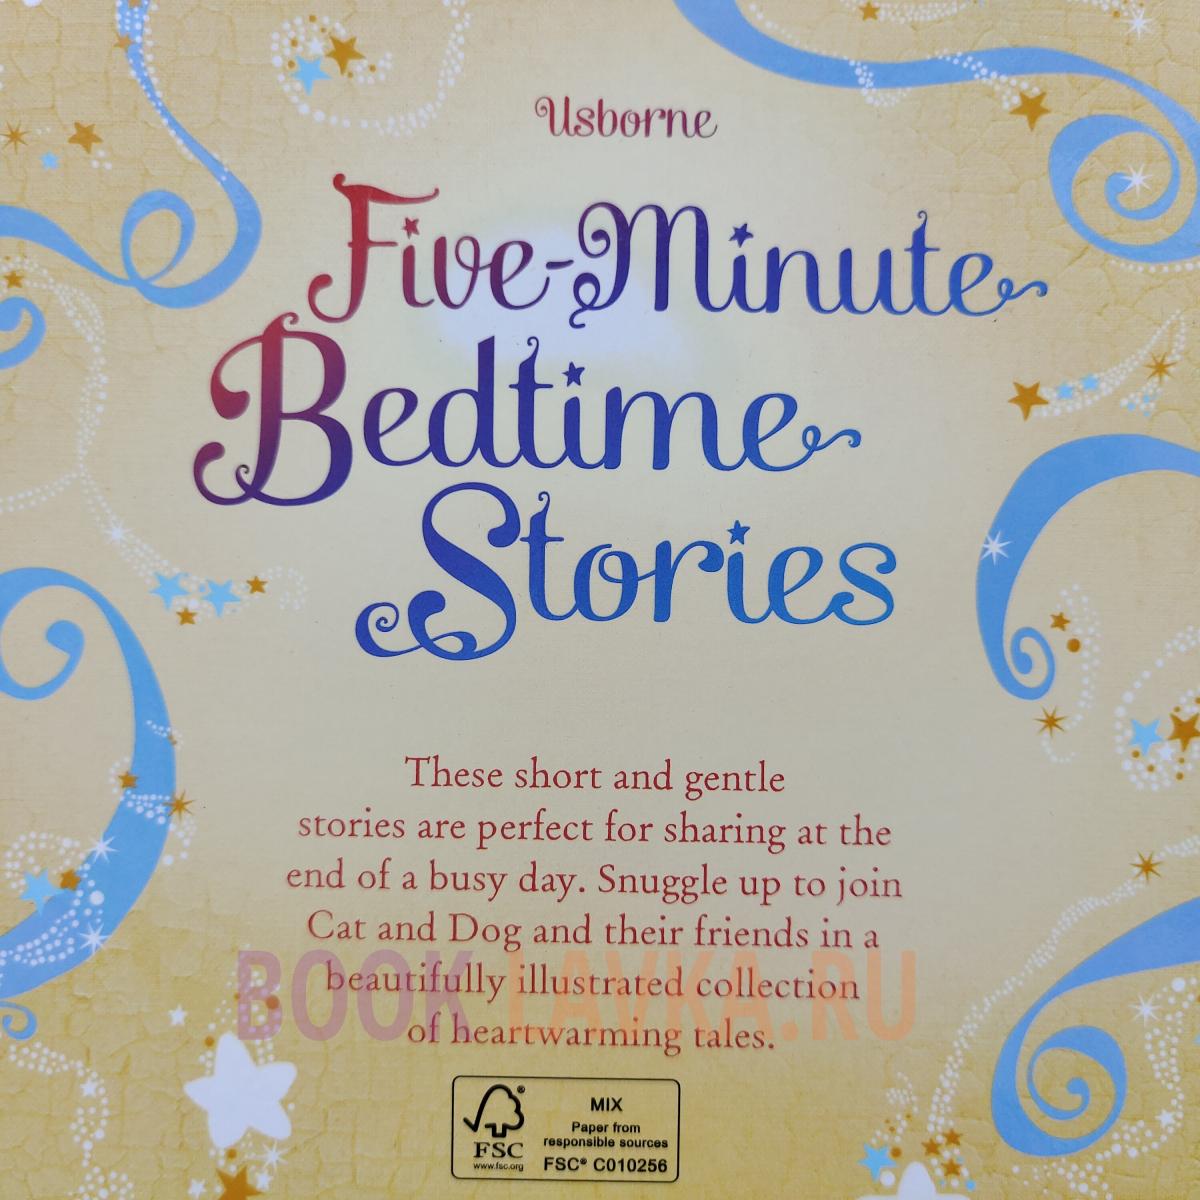 5 minutes bedtime stories with miss elaine